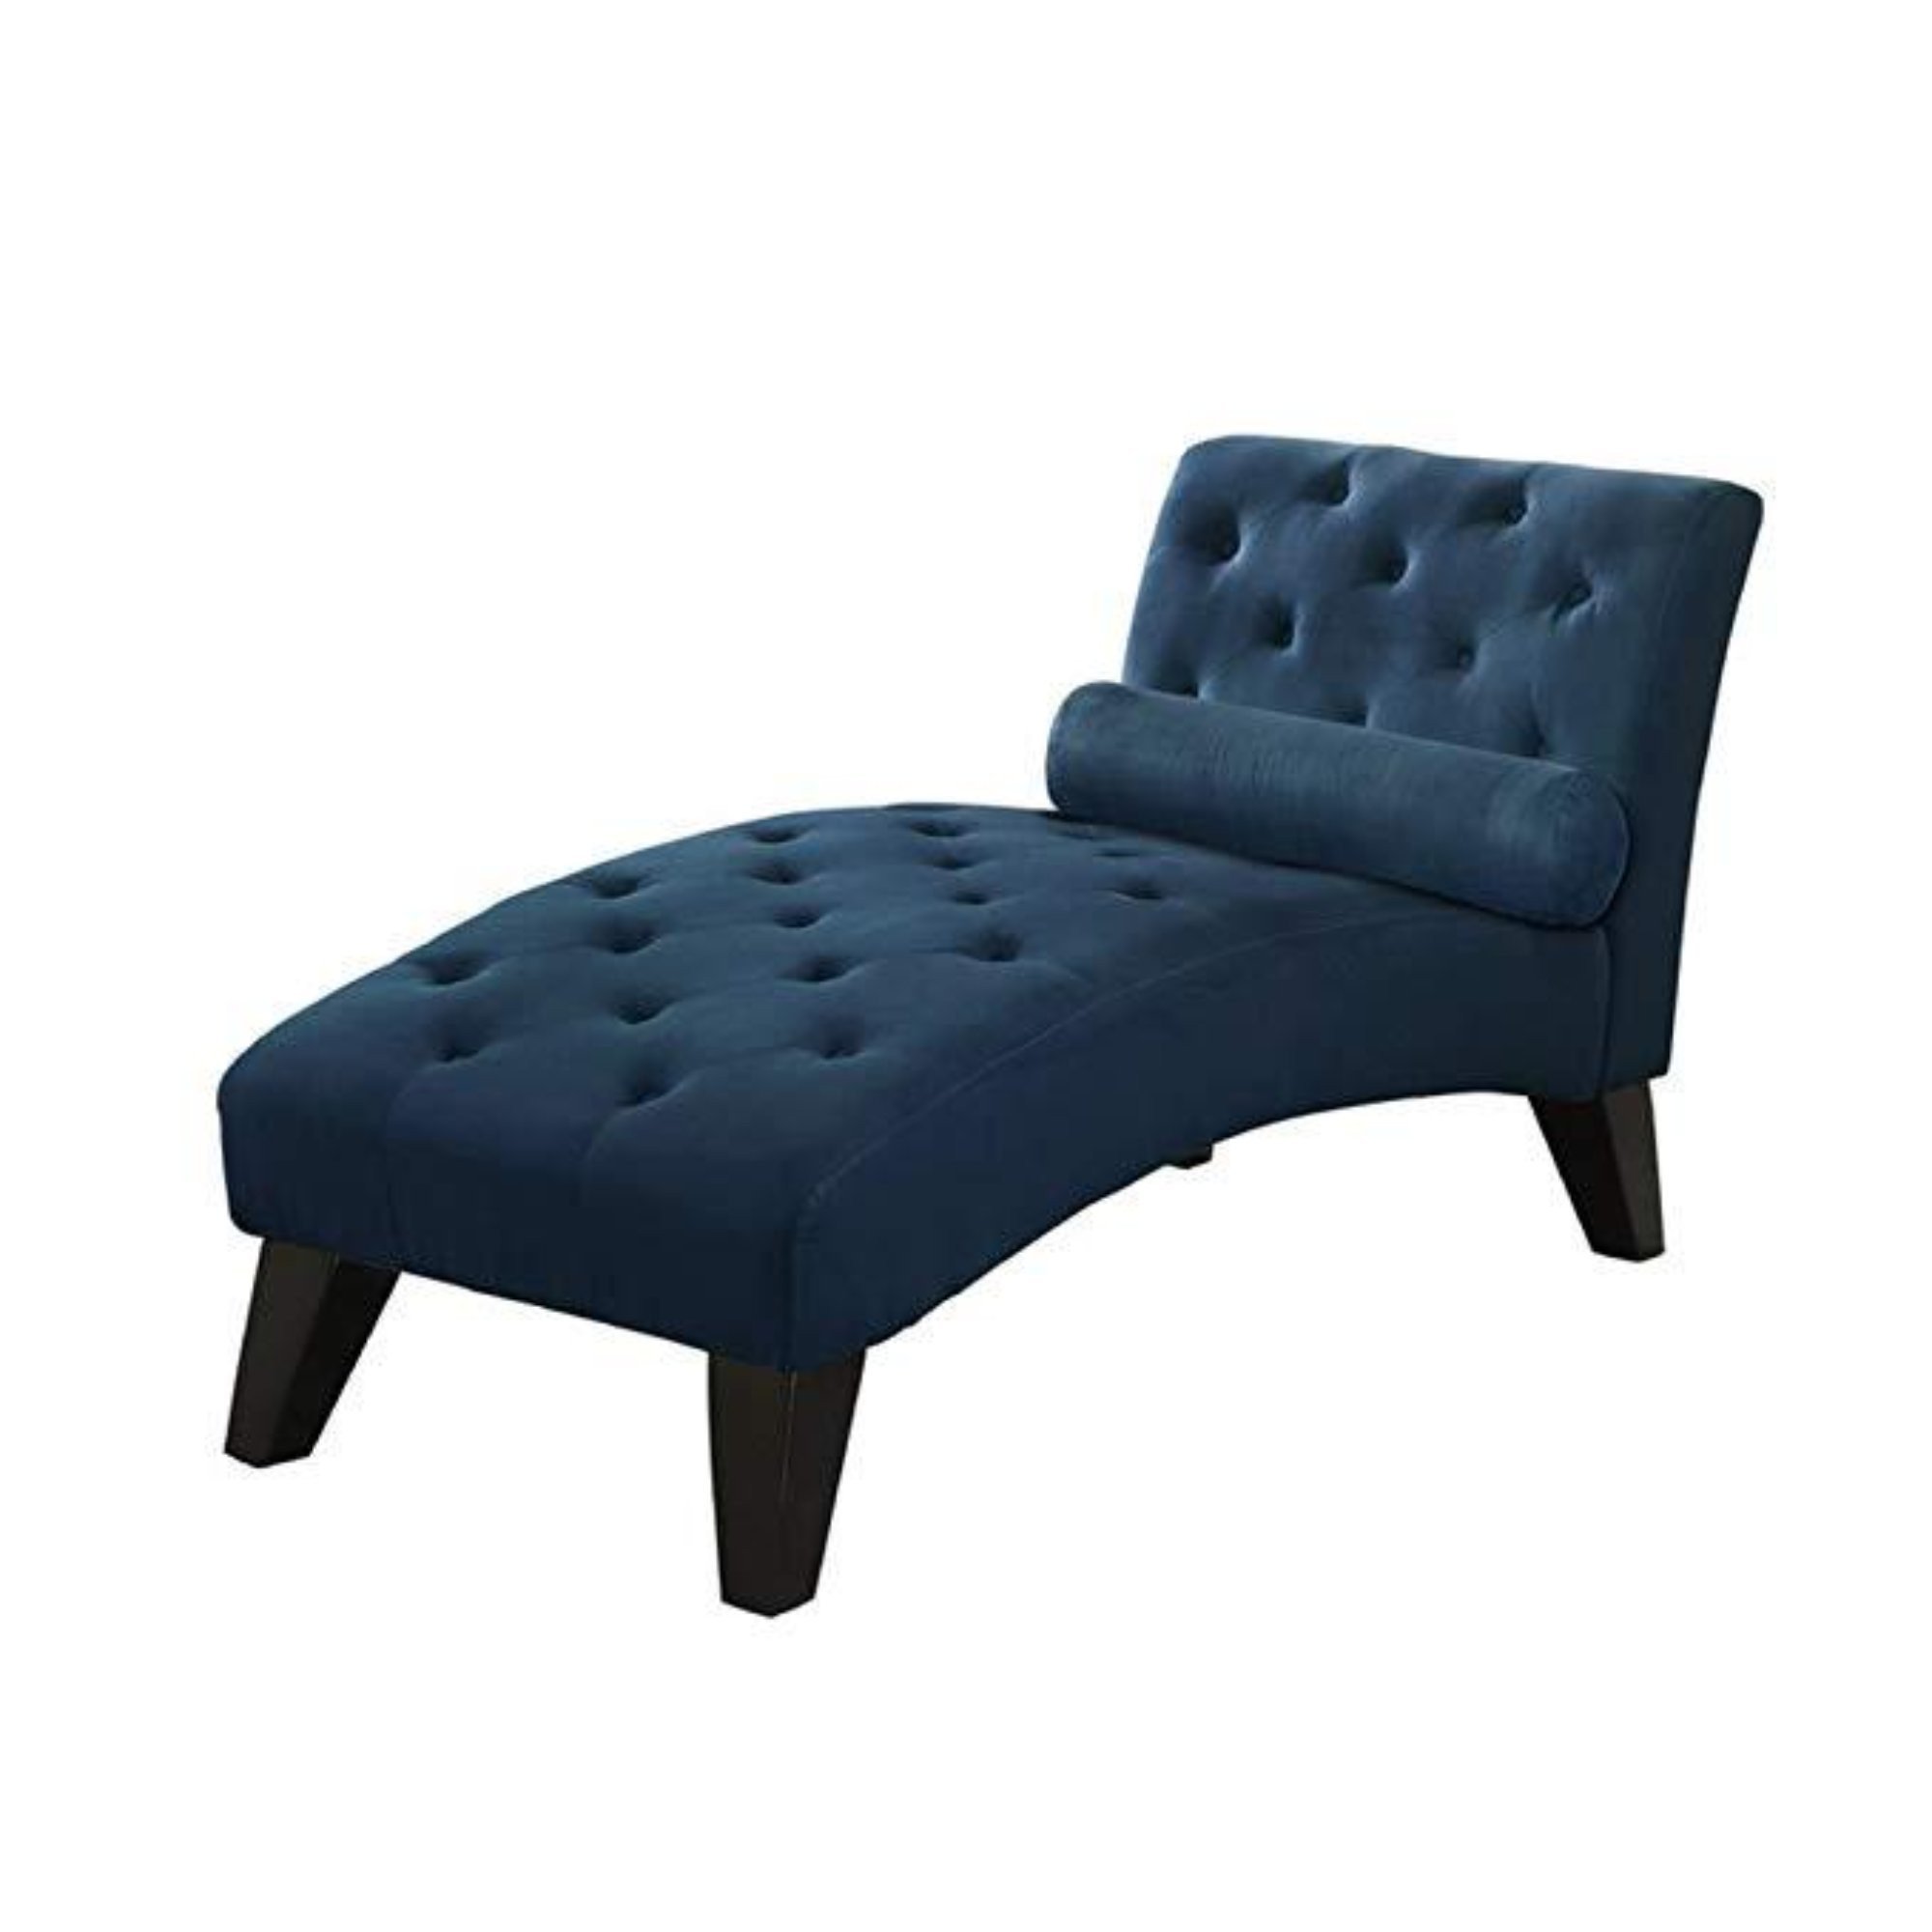 Chaise Chair for Bedroom Best Of Contemporary Chaise Lounge Chair Indoor Living Room